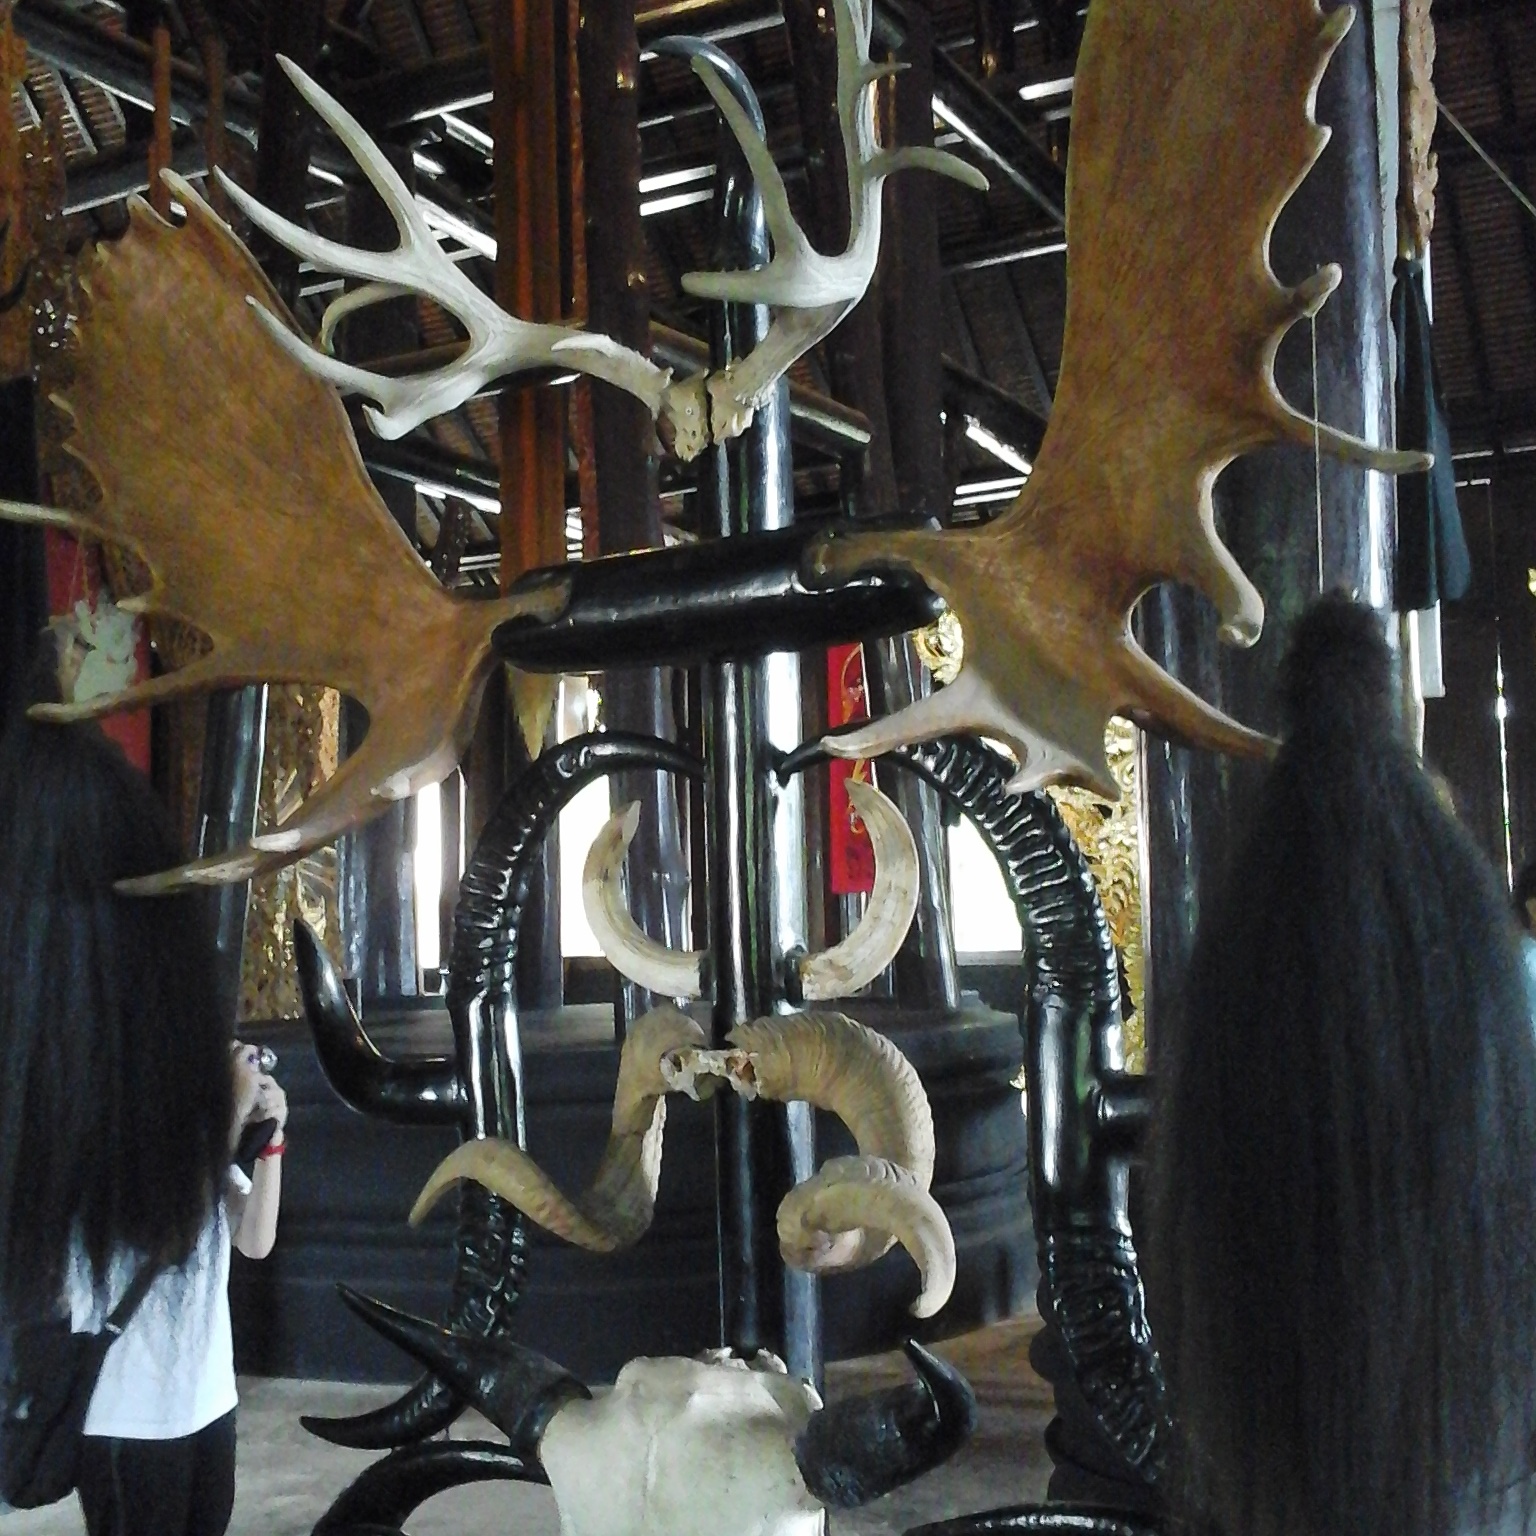 Huge wooden chairs made of antlers, horns, hair and skulls placed around a huge dining